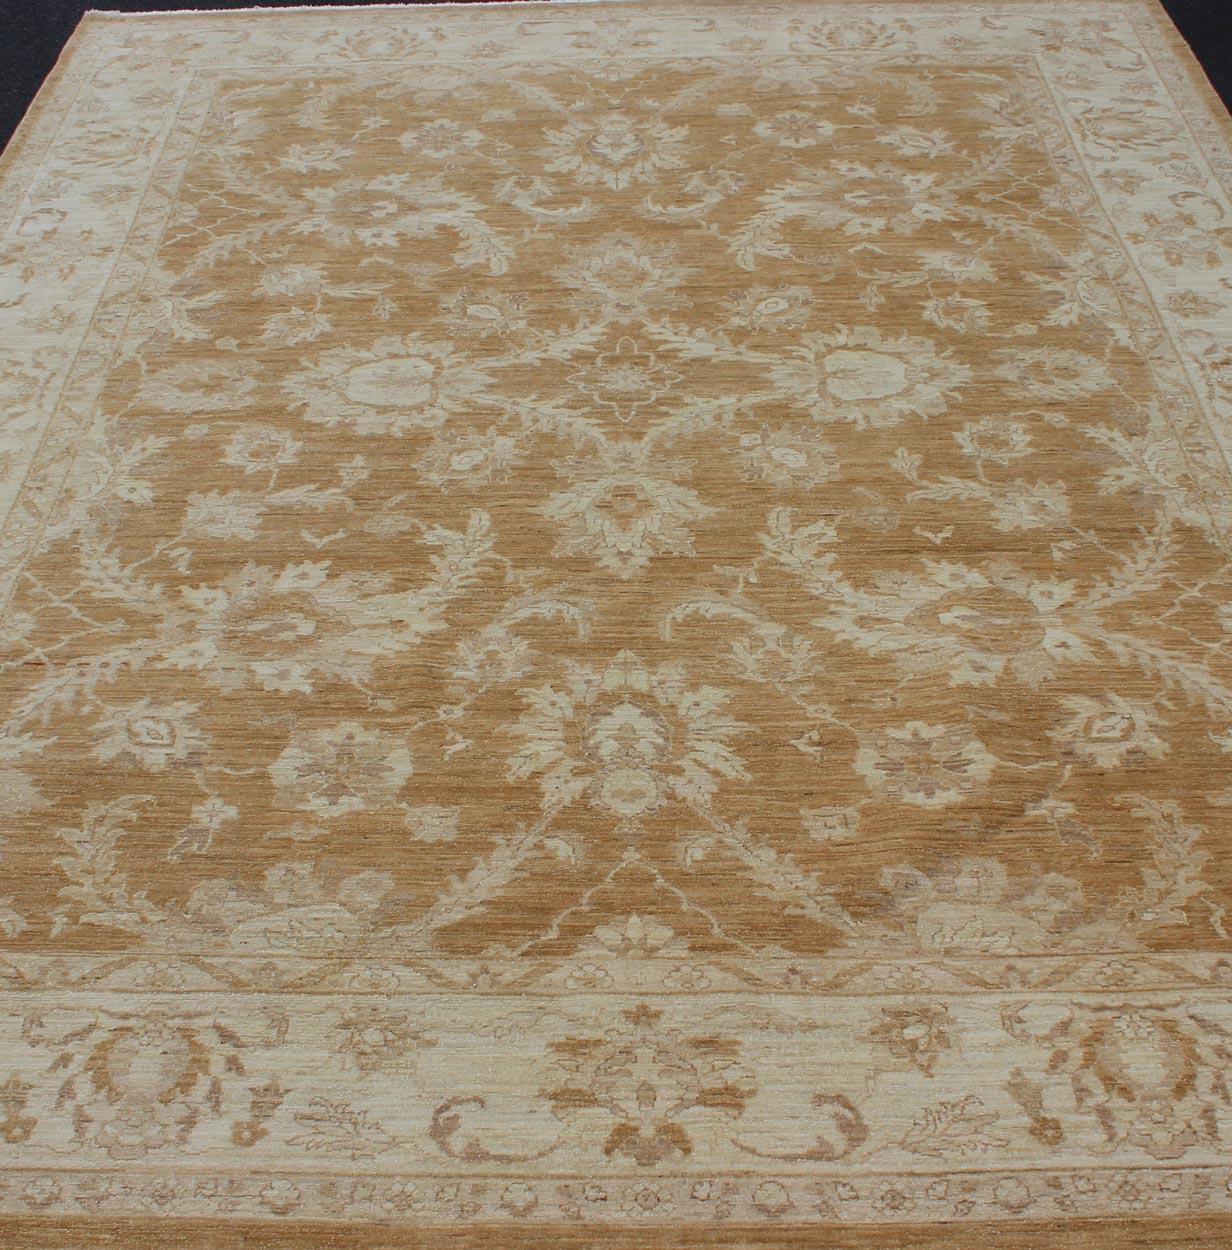 Wool Sultanabad Design Afghan Made Floral Pattern in Earth Tones with Light Caramel For Sale